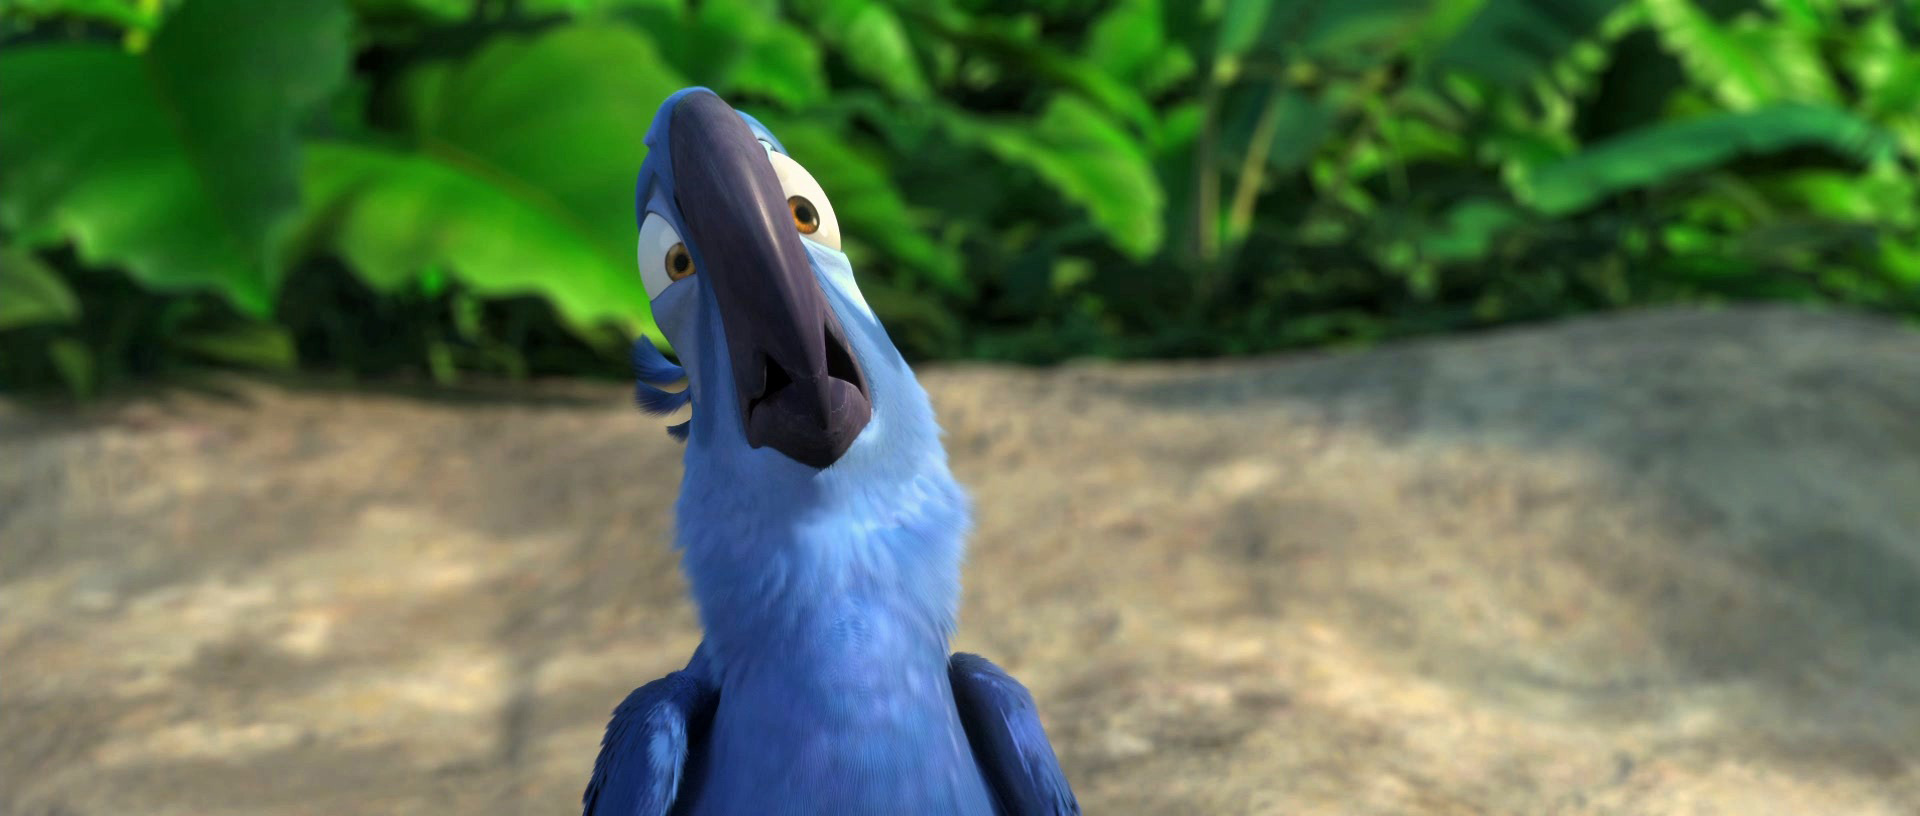 Blu the Macaw from the movie Rio Desktop Wallpaper